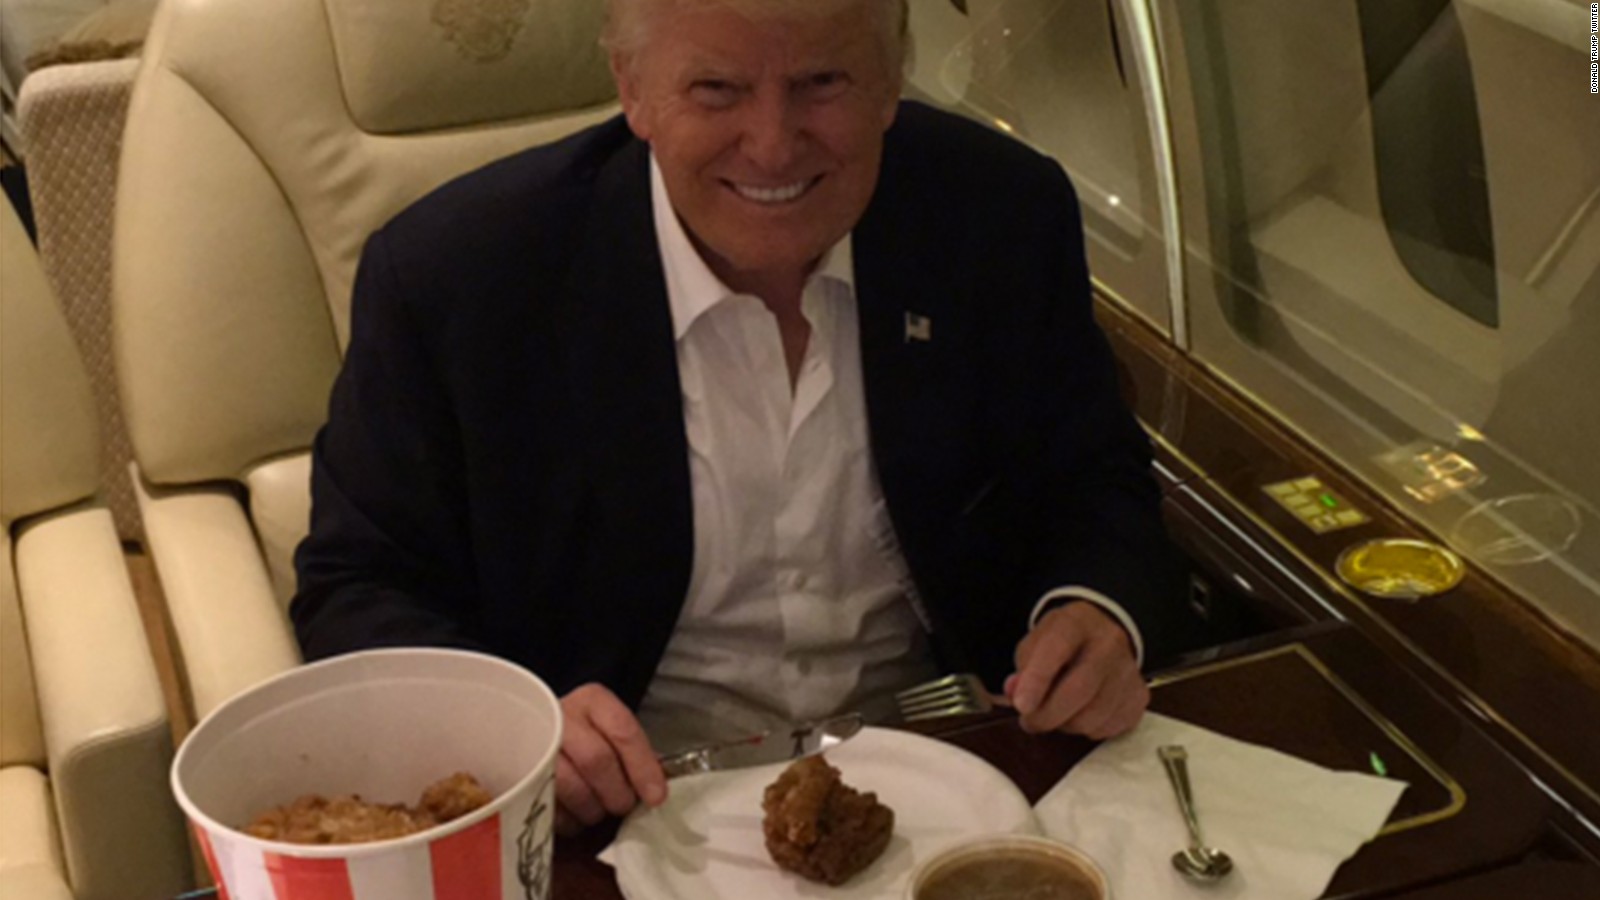 Donald Trump Eats KFC With A Knife And Fork Twitter Shade Follows